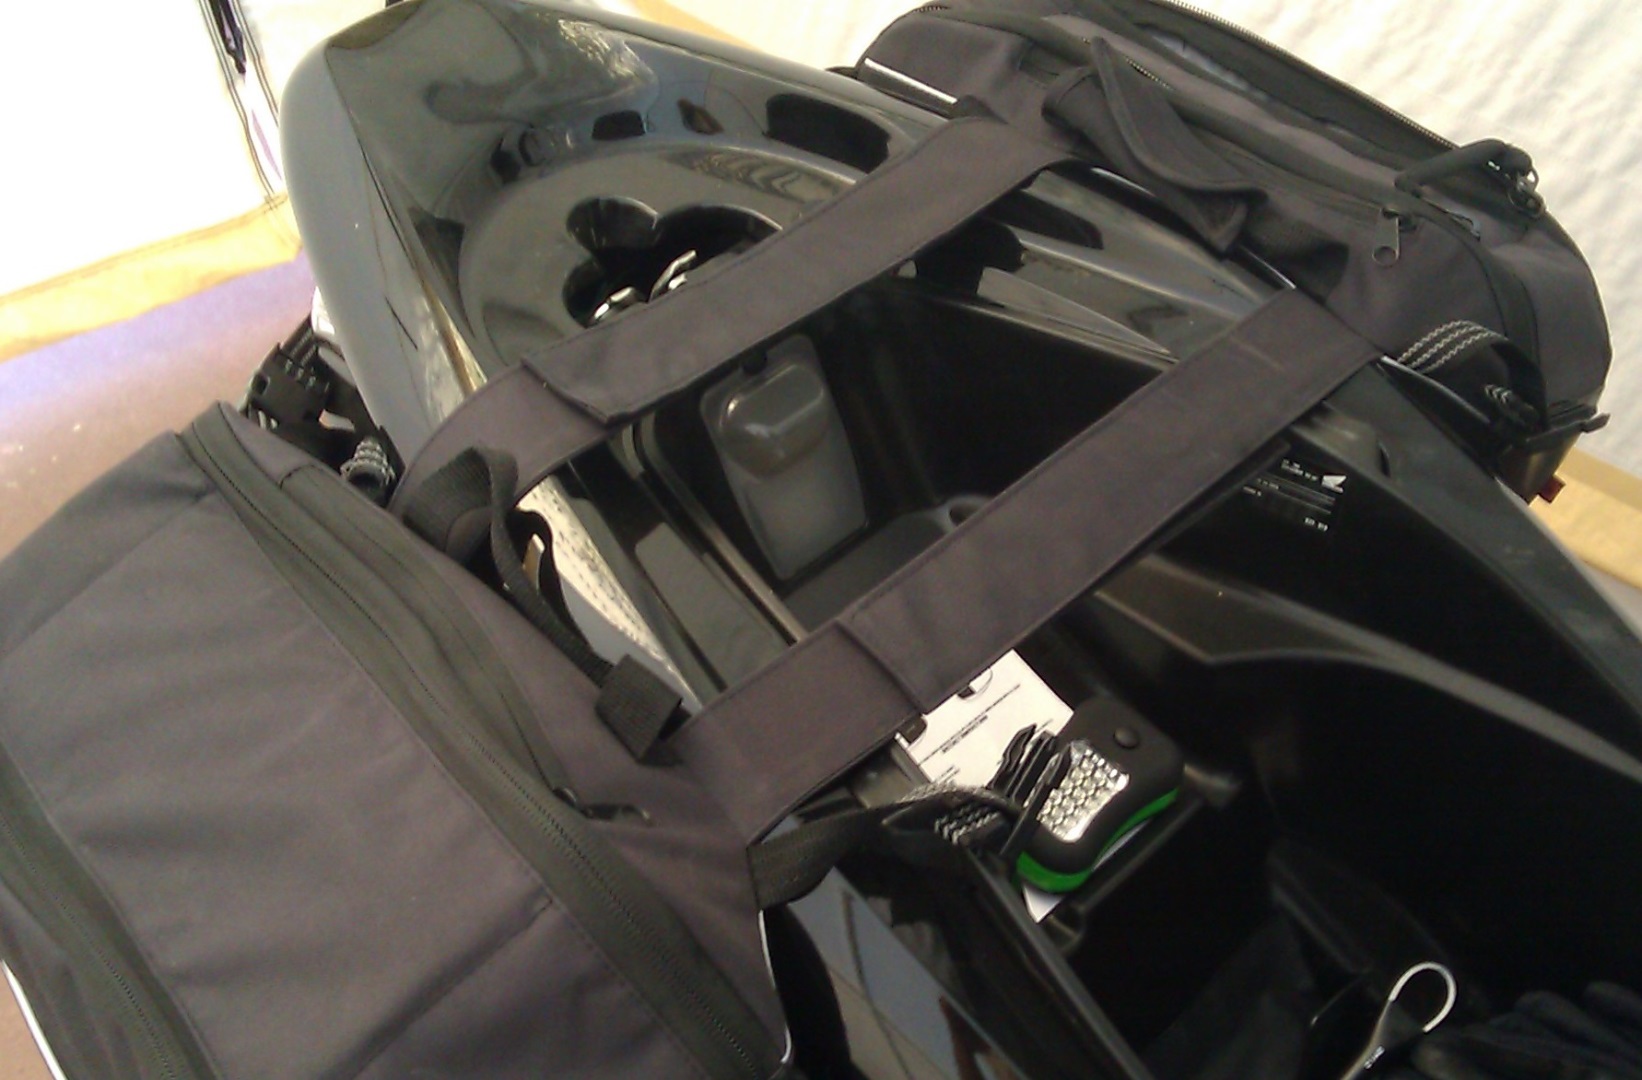 here are the saddlebags attached under the seat. There are two straps that go under the seat at the front and two that go below the taillight at the back. If you remove the wide straps that go under the seat, the two bags will clip together and there is a handle that hooks together with velcro, so you use the bag as a small briefcase (no large laptop will fit -- although tablets and/or winbooks would be fine).